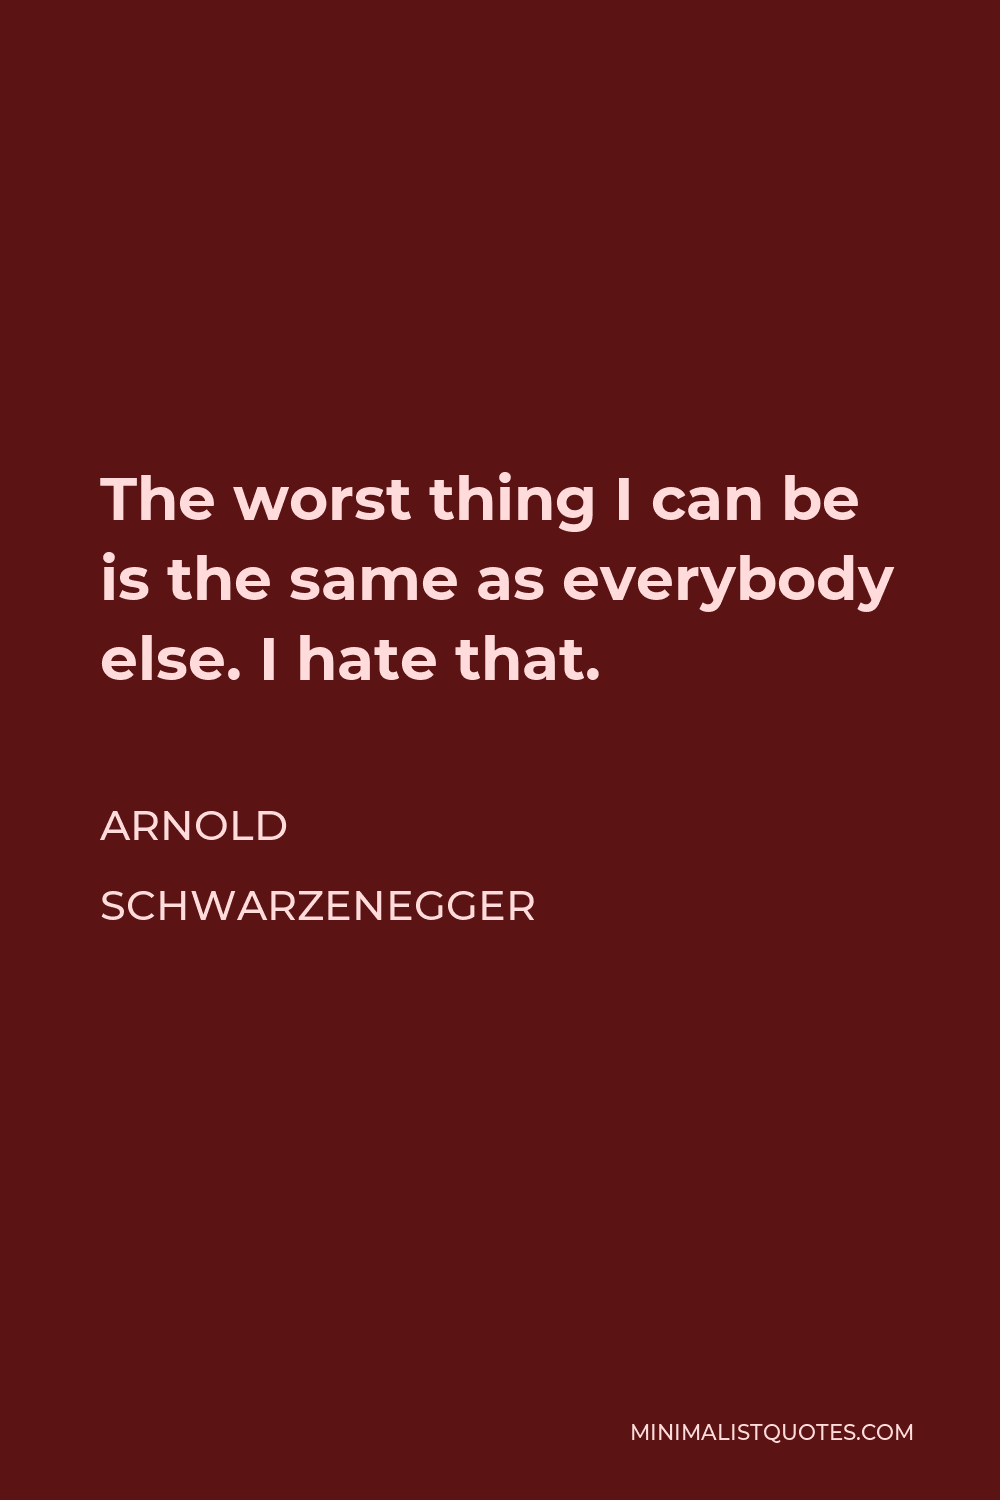 Arnold Schwarzenegger Quote - The worst thing I can be is the same as everybody else. I hate that.